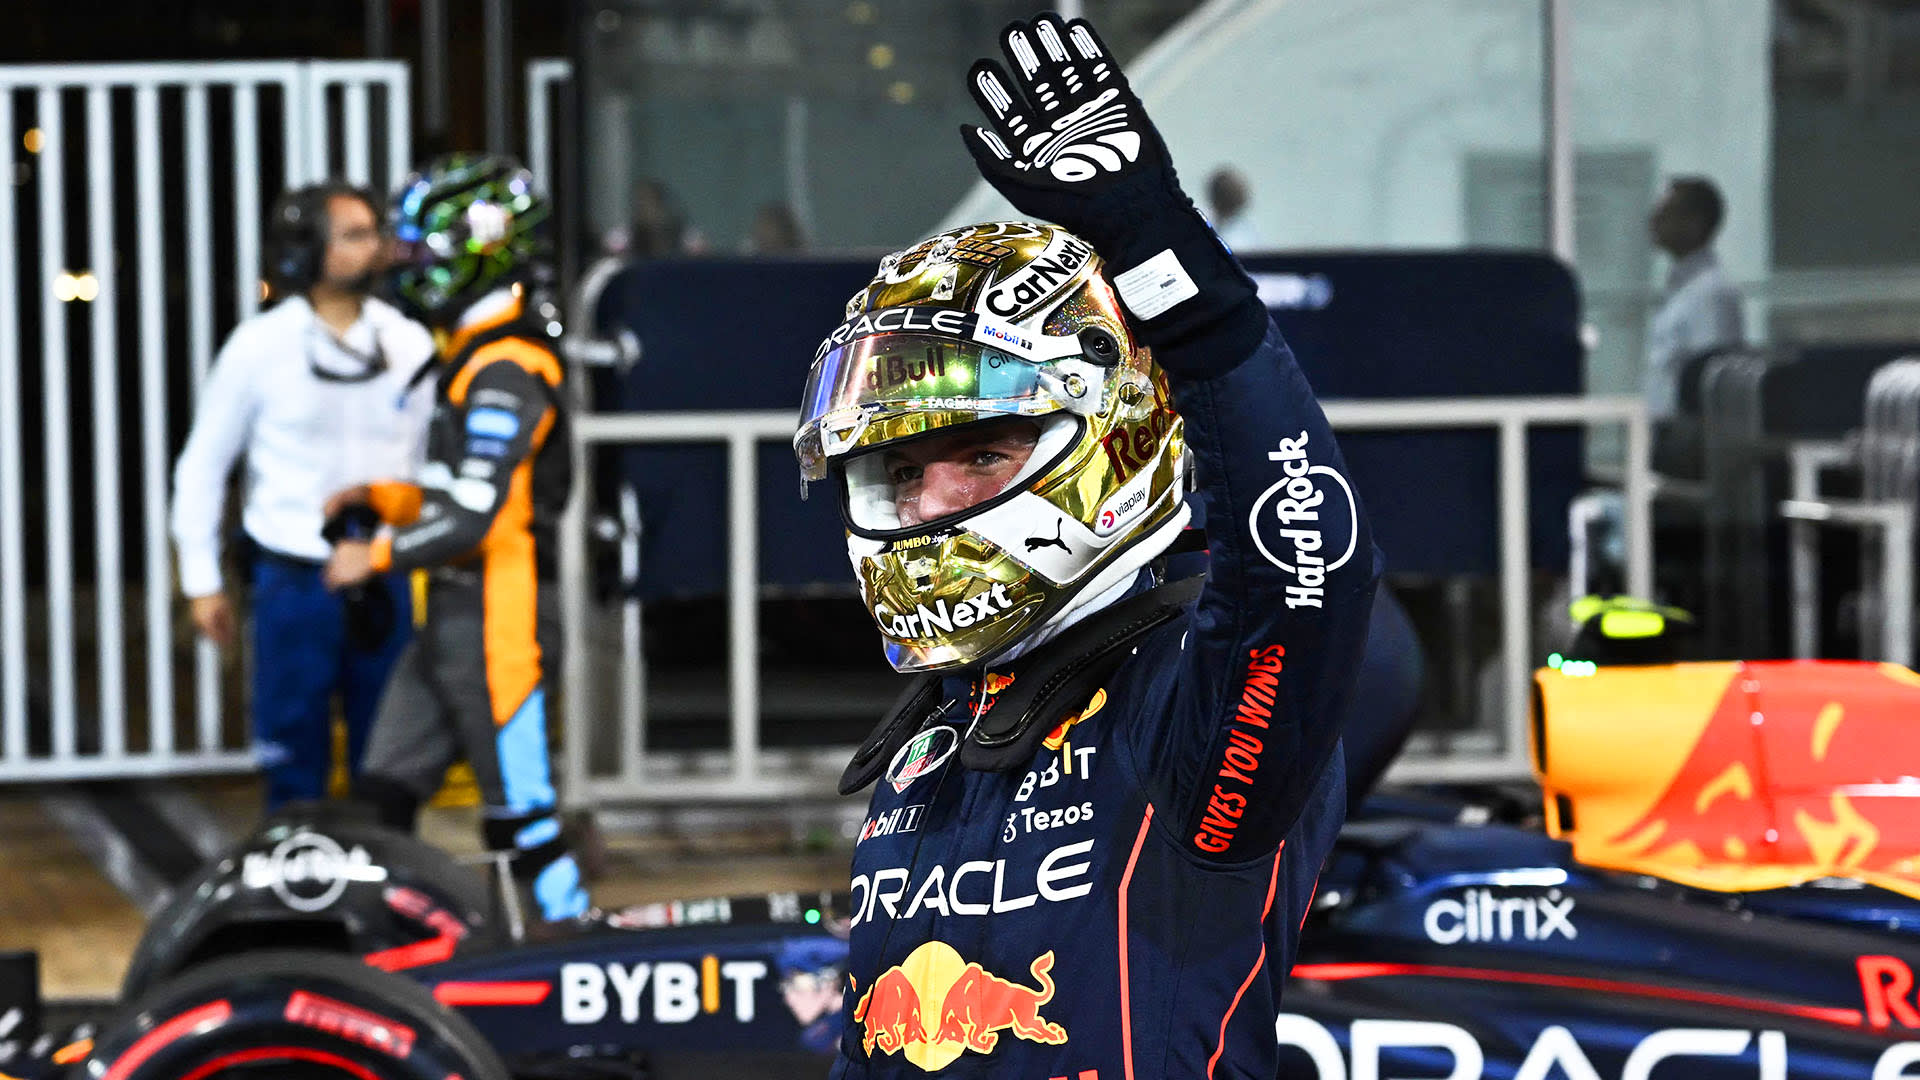 2022 Abu Dhabi Grand Prix qualifying report and highlights Verstappen storms to pole as Red Bull score 1-2 in final qualifying session of the season at Yas Marina Formula 1®